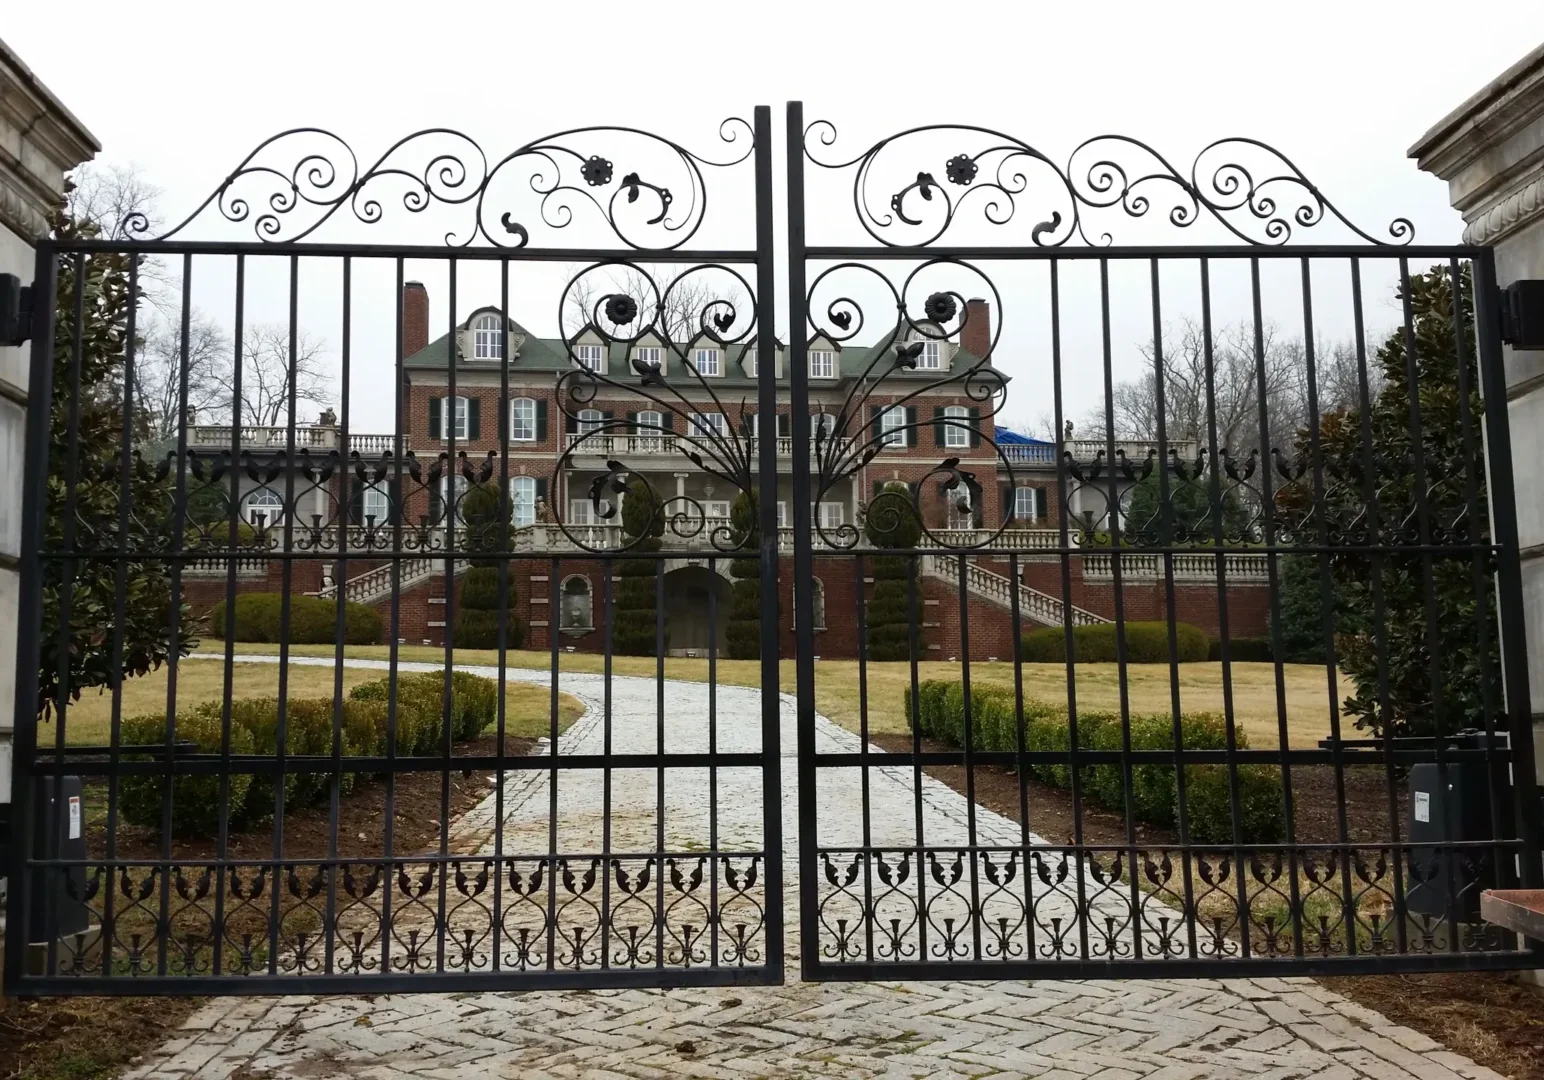 A gated driveway leading to an old mansion.